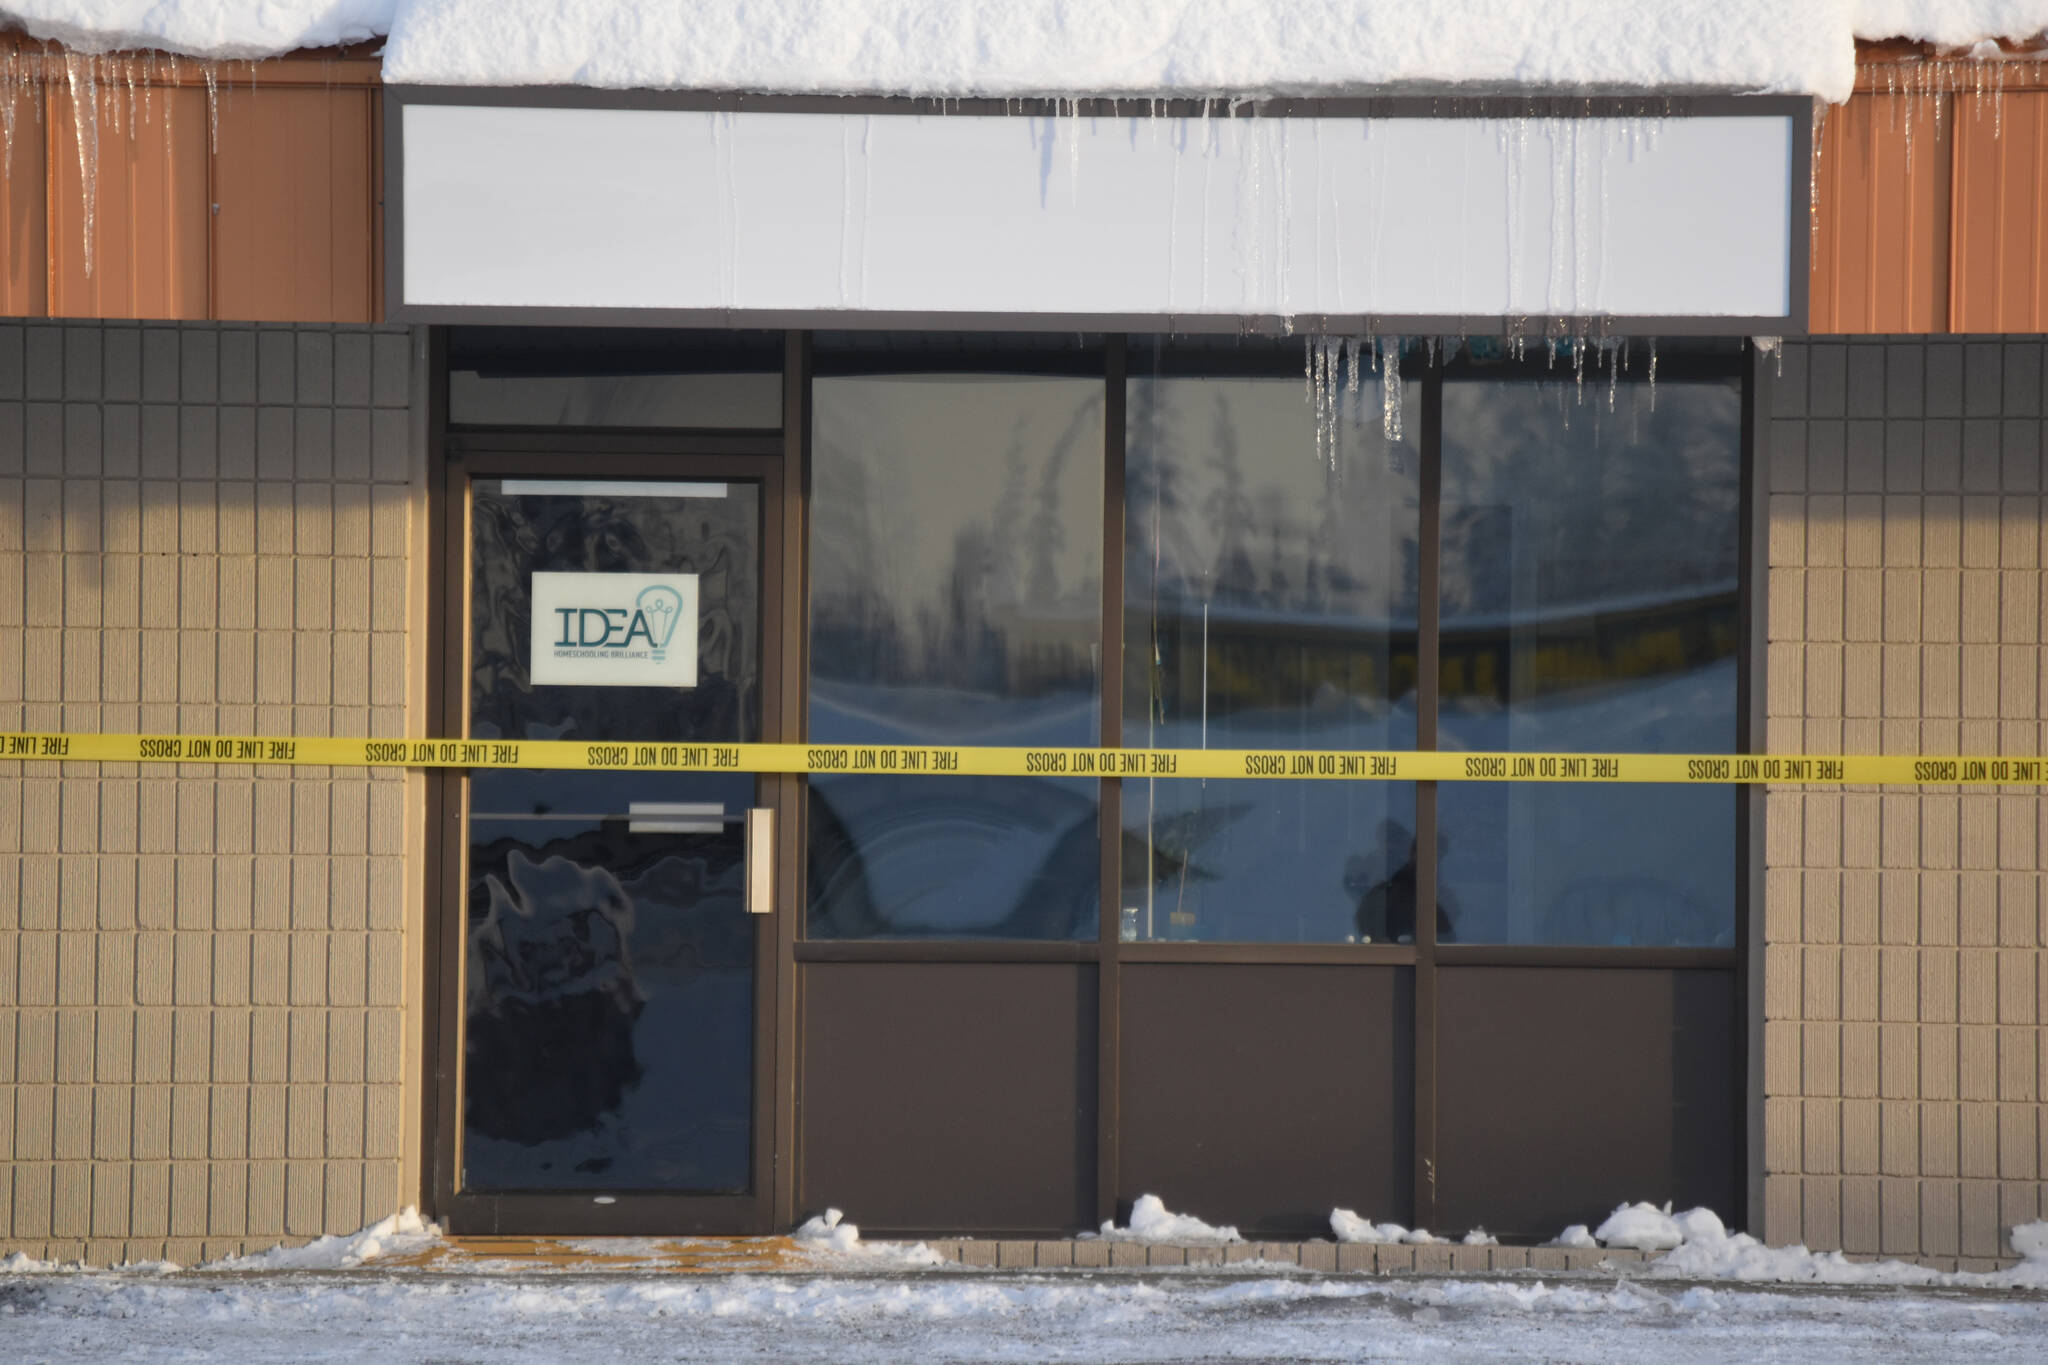 IDEA Homeschool offices are closed with caution tape hours after a roof collapse forced staff to evacuate on Friday, Dec. 16, 2022, in Soldotna, Alaska. Other businesses within the Copper Center were also closed as a result of the collapse. (Jake Dye/Peninsula Clarion)